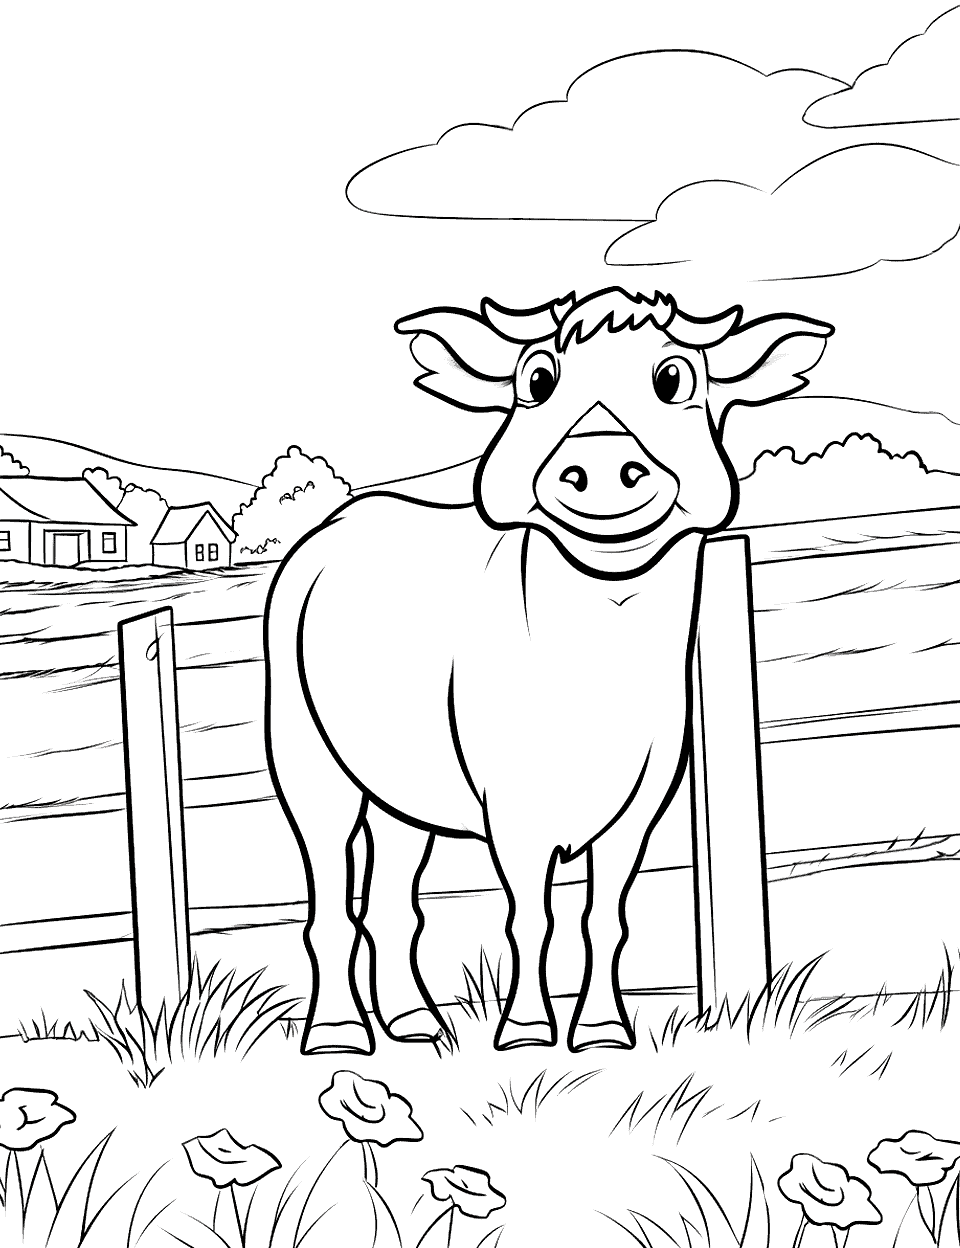 Happy Cow Grazing Farm Coloring Page - A single cow grazing peacefully in a meadow near a fence.